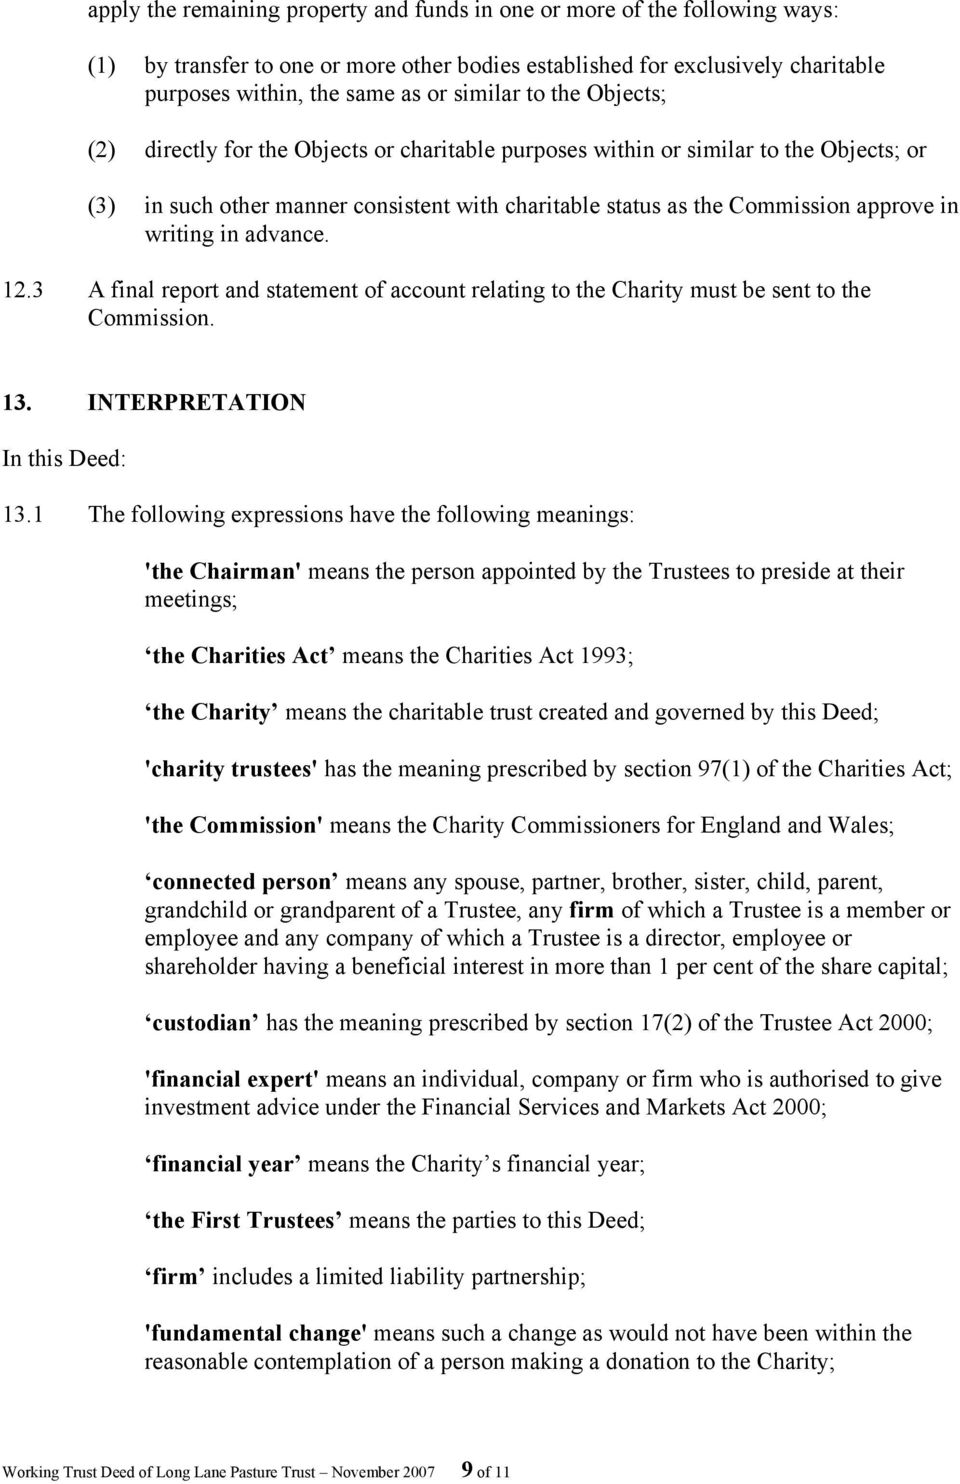 writing in advance. 12.3 A final report and statement of account relating to the Charity must be sent to the Commission. 13. INTERPRETATION In this Deed: 13.